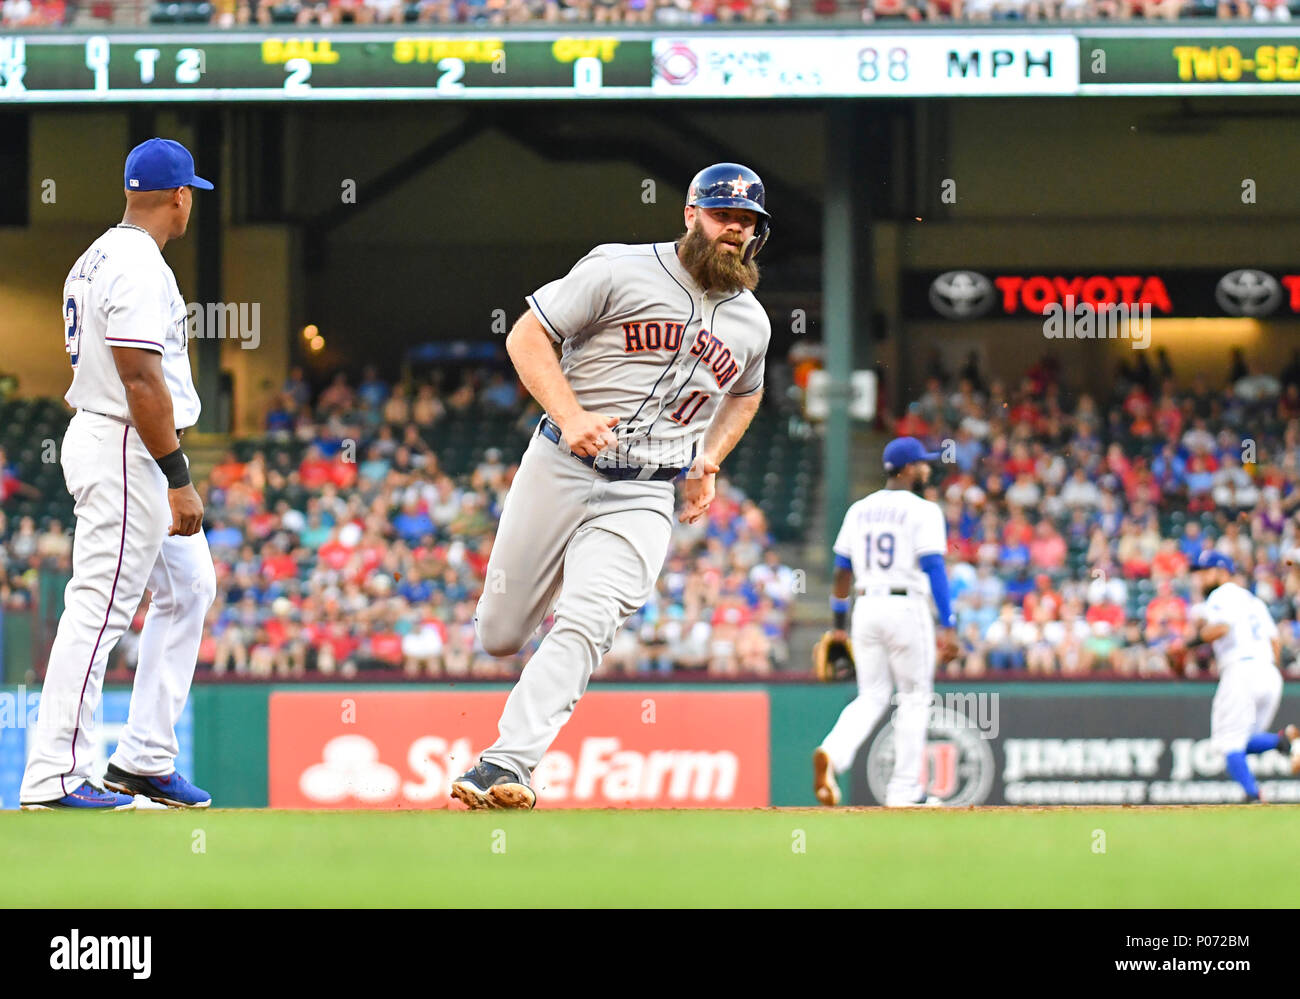 Jun 08, 2018: Houston Astros catcher Evan Gattis #11 rounds third base to score on an RBI single by Marvin Gonzalez in the second inning during an MLB game between the Houston Astros and the Texas Rangers at Globe Life Park in Arlington, TX Houston defeated Texas 7-3 Albert Pena/CSM Stock Photo